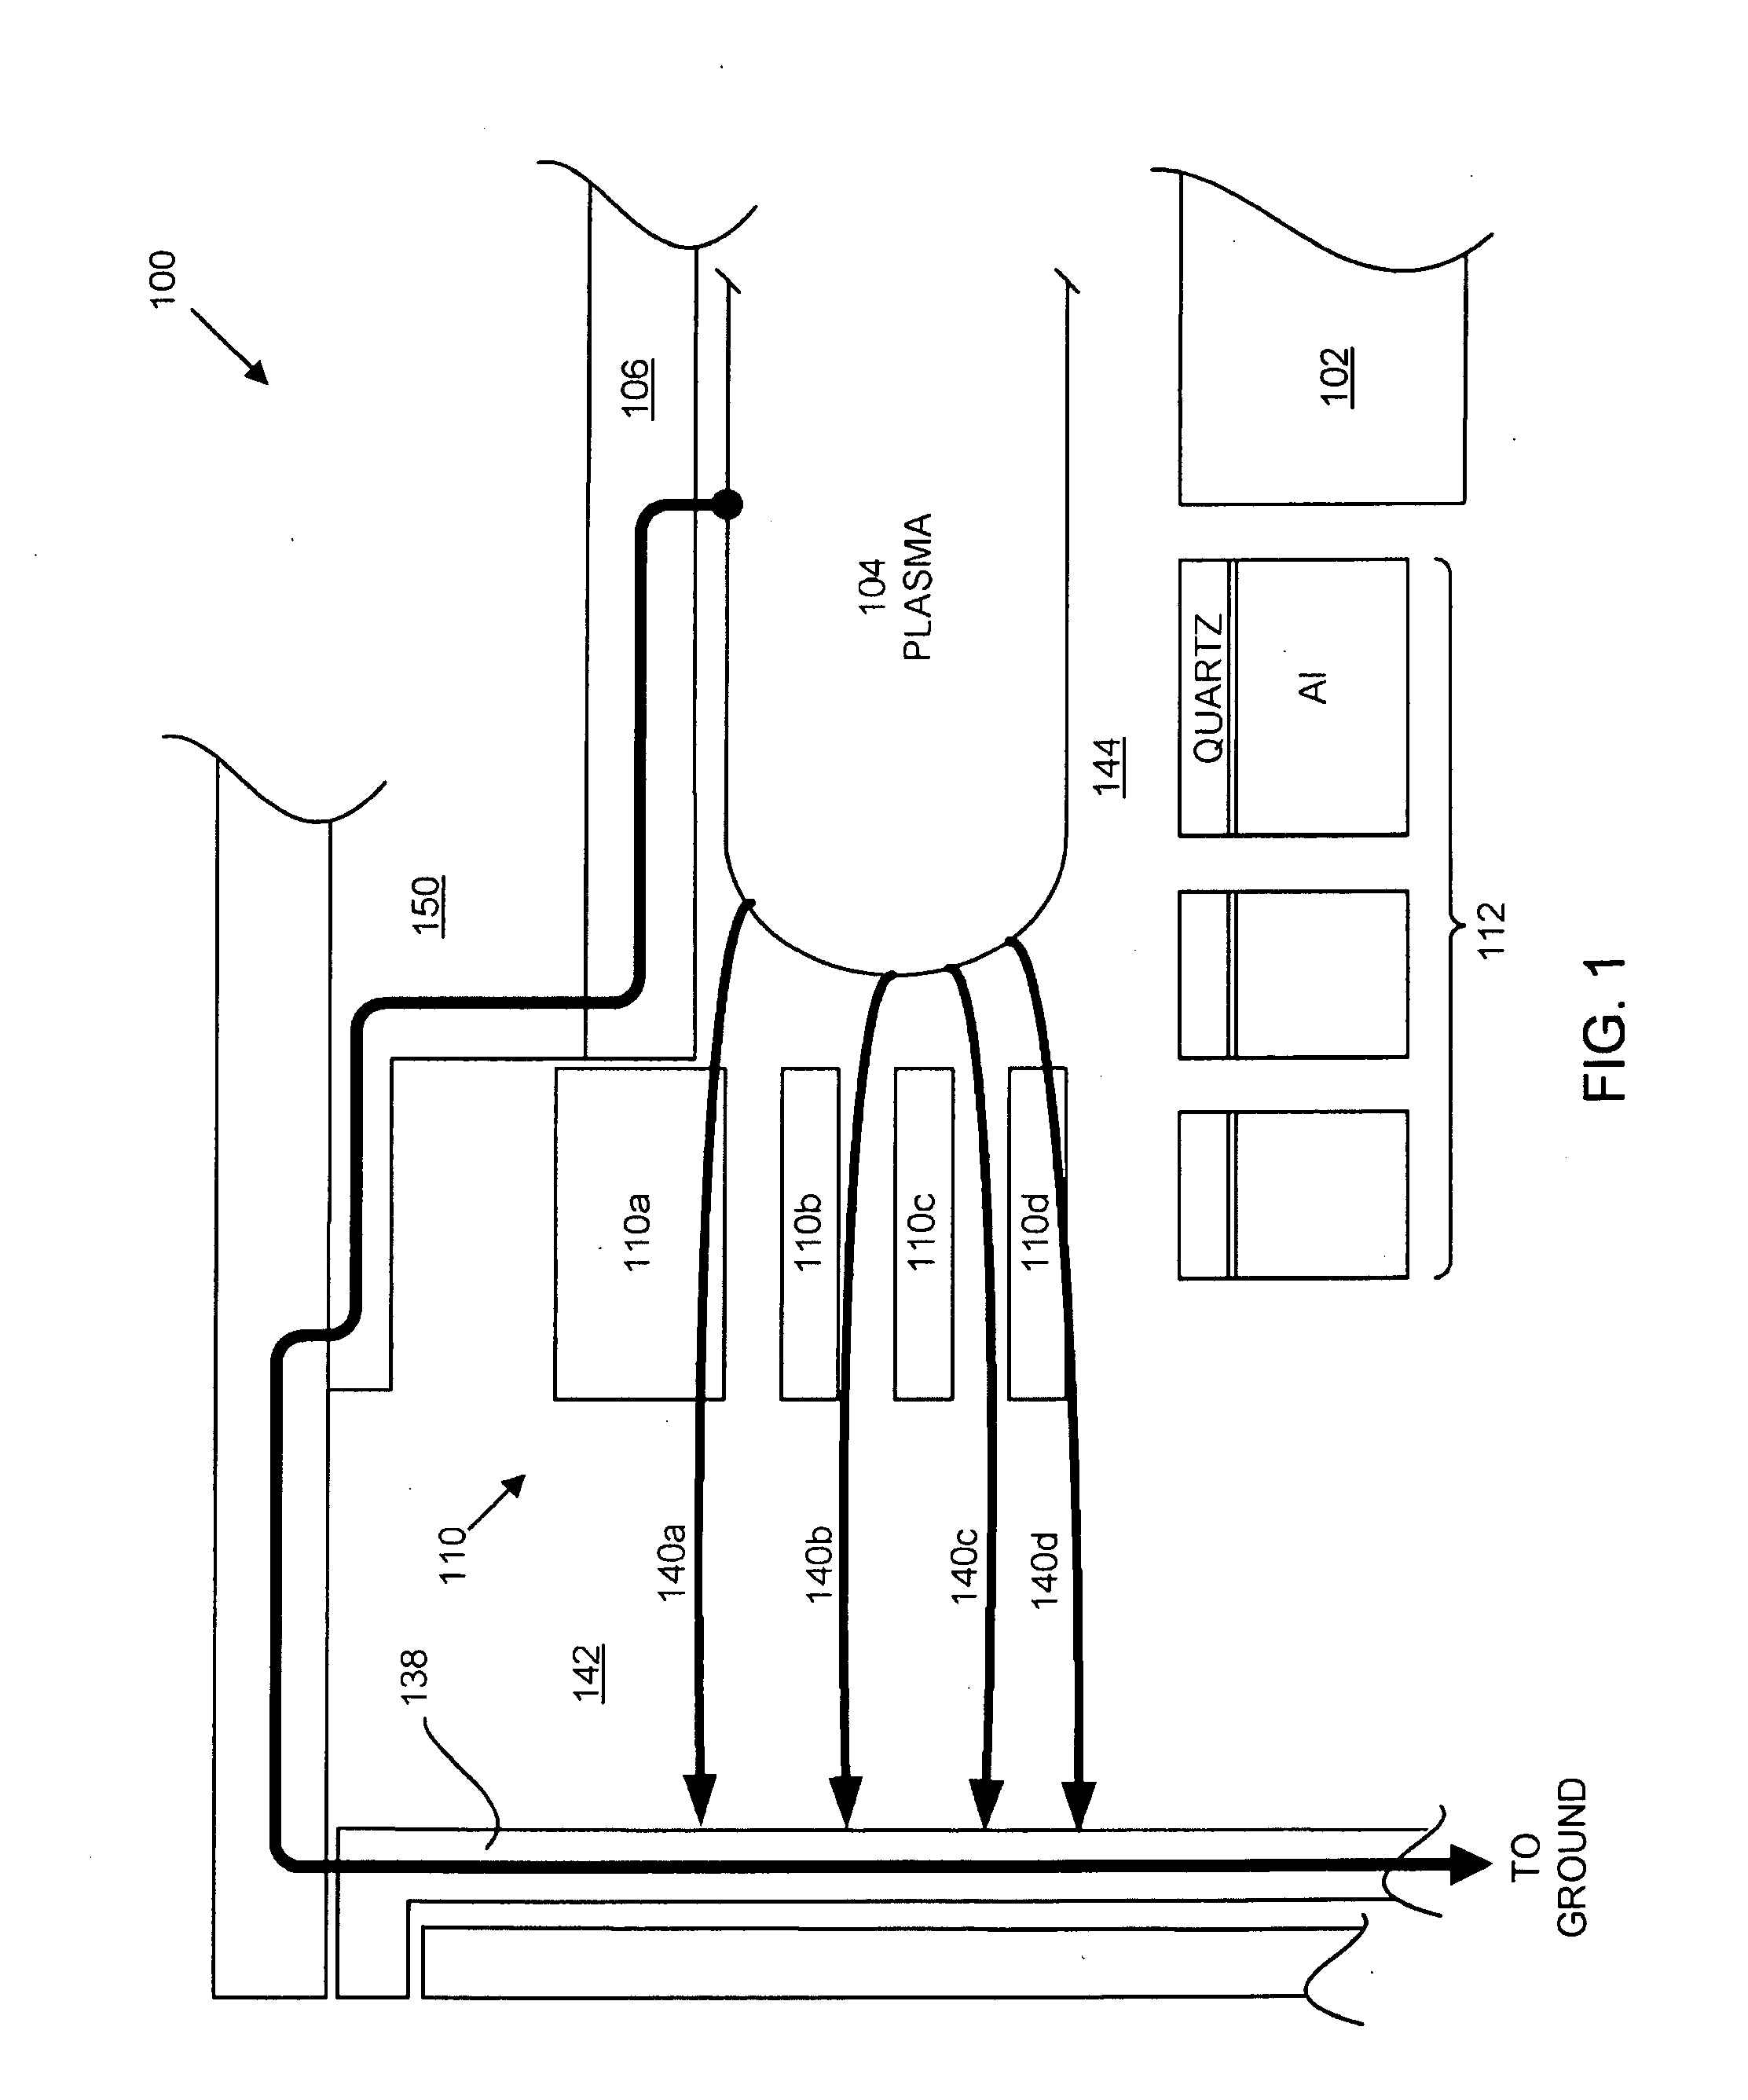 Combined wafer area pressure control and plasma confinement assembly